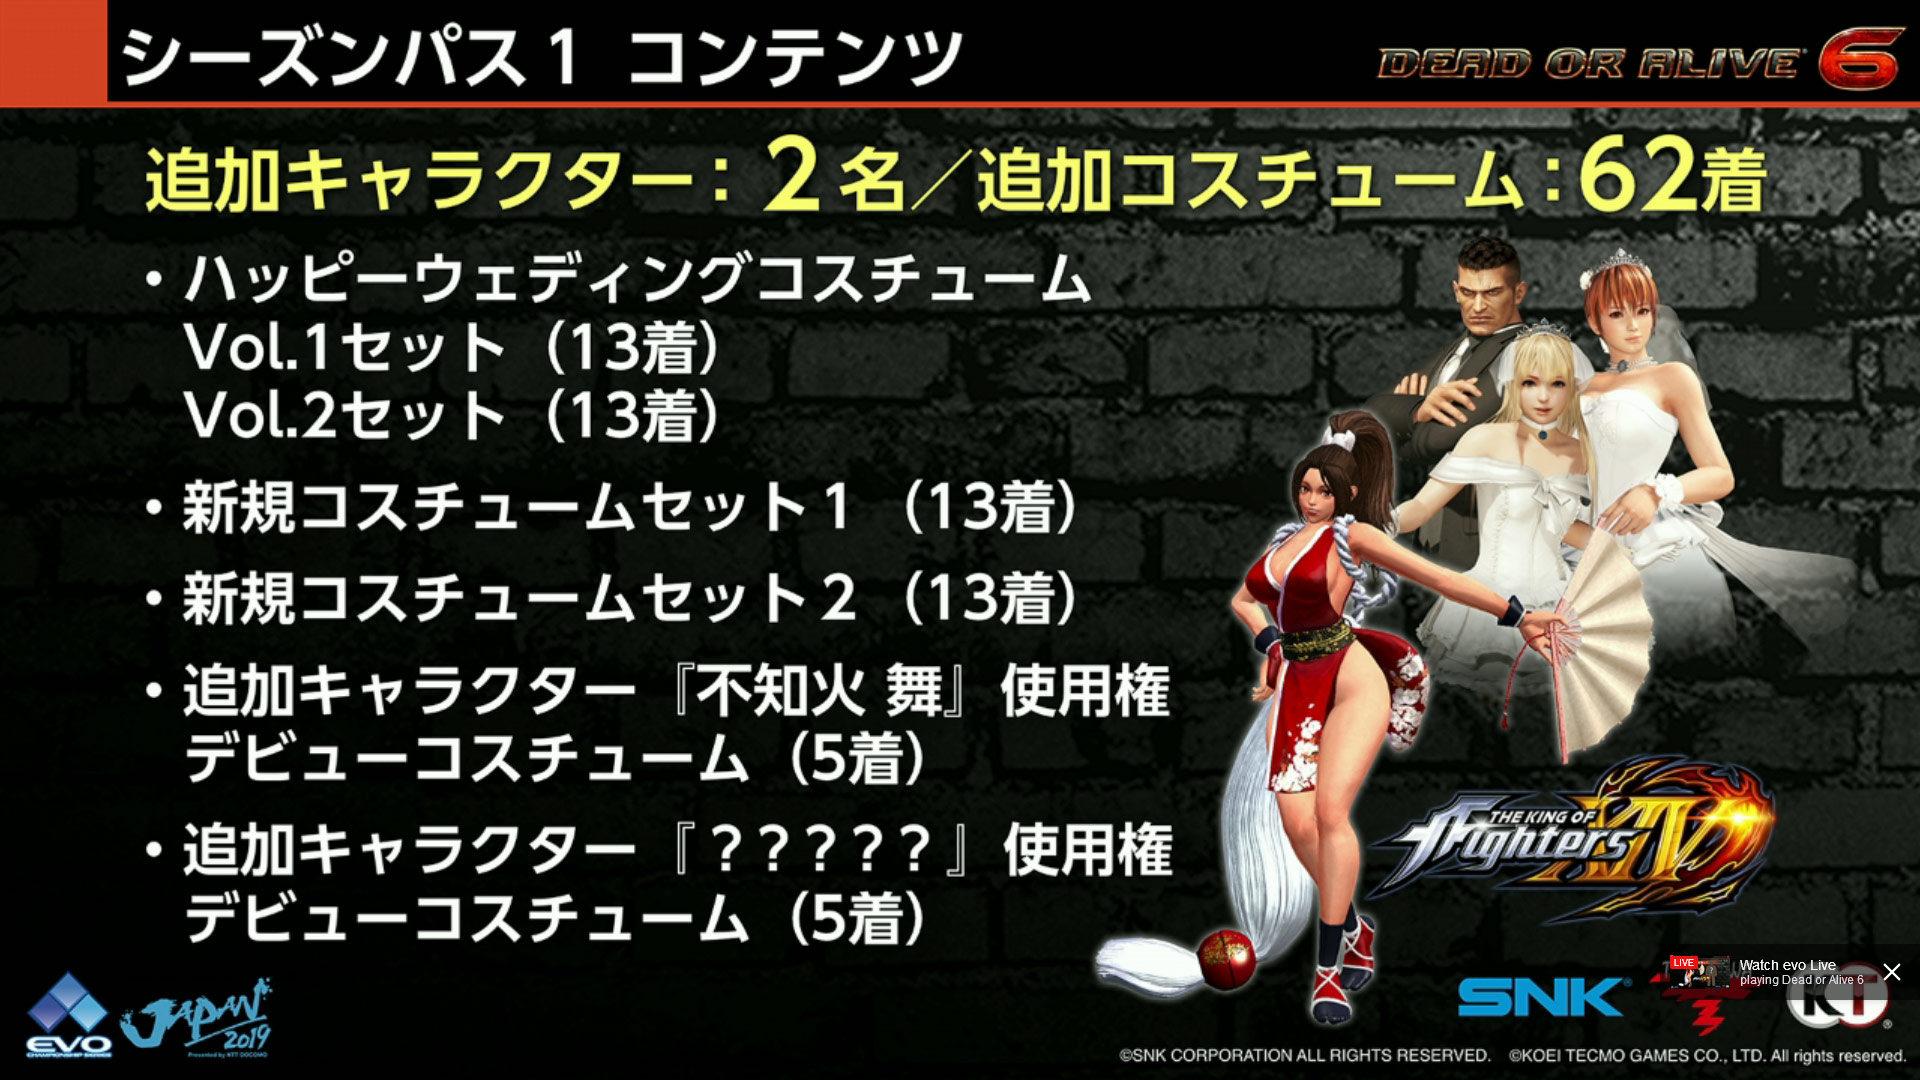 Dead or Alive 6 Getting Deluxe Demo, Mai Shiranui and Another KoF Character  Coming as DLC